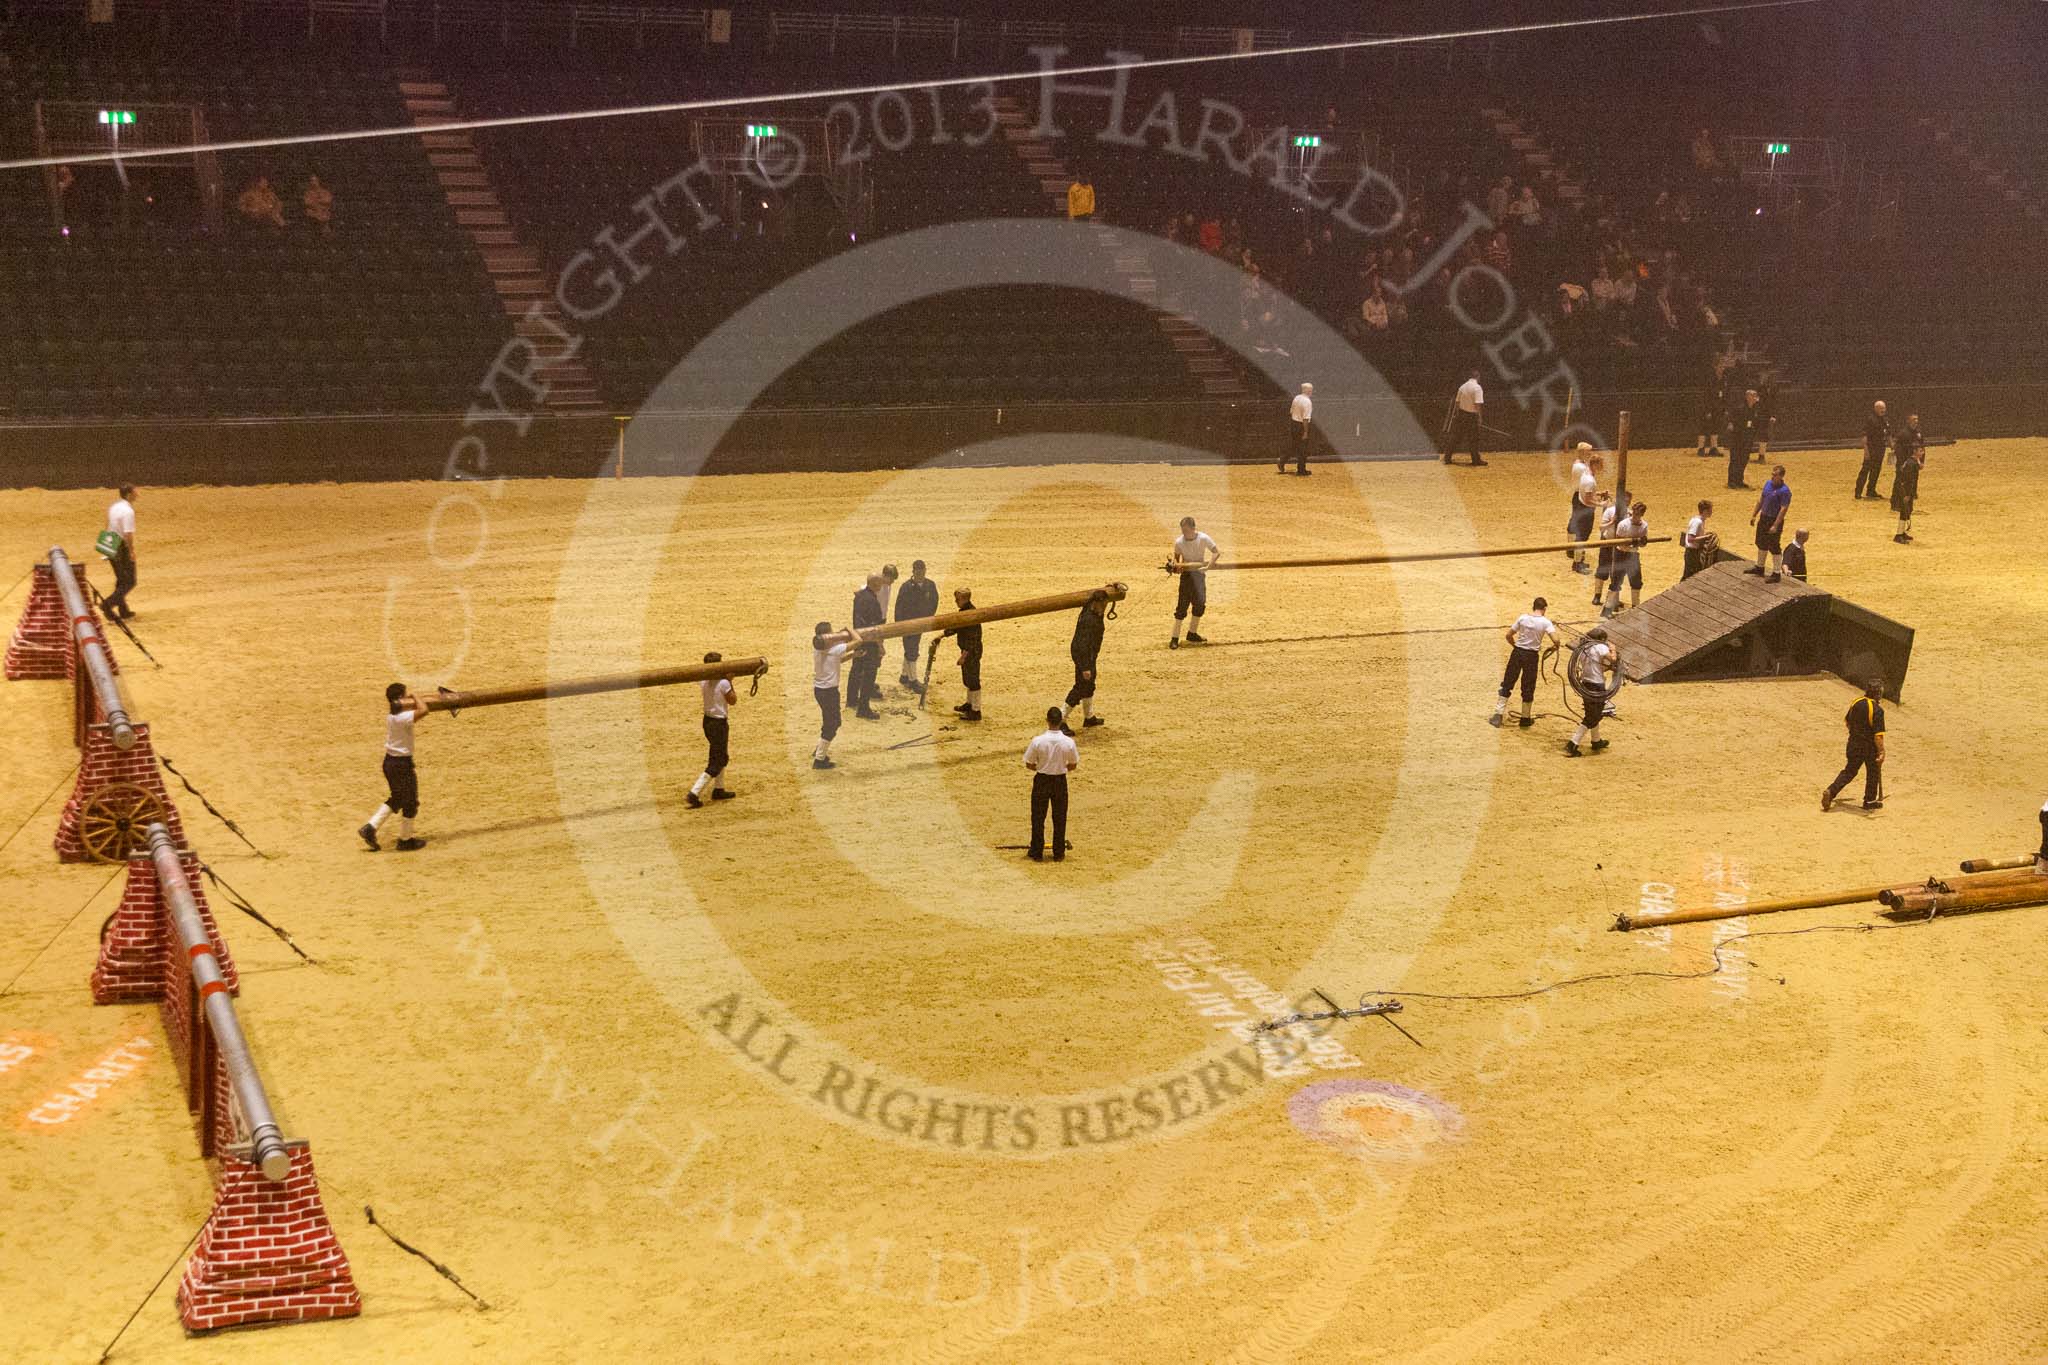 British Military Tournament 2013.
Earls Court,
London SW5,

United Kingdom,
on 06 December 2013 at 15:48, image #251